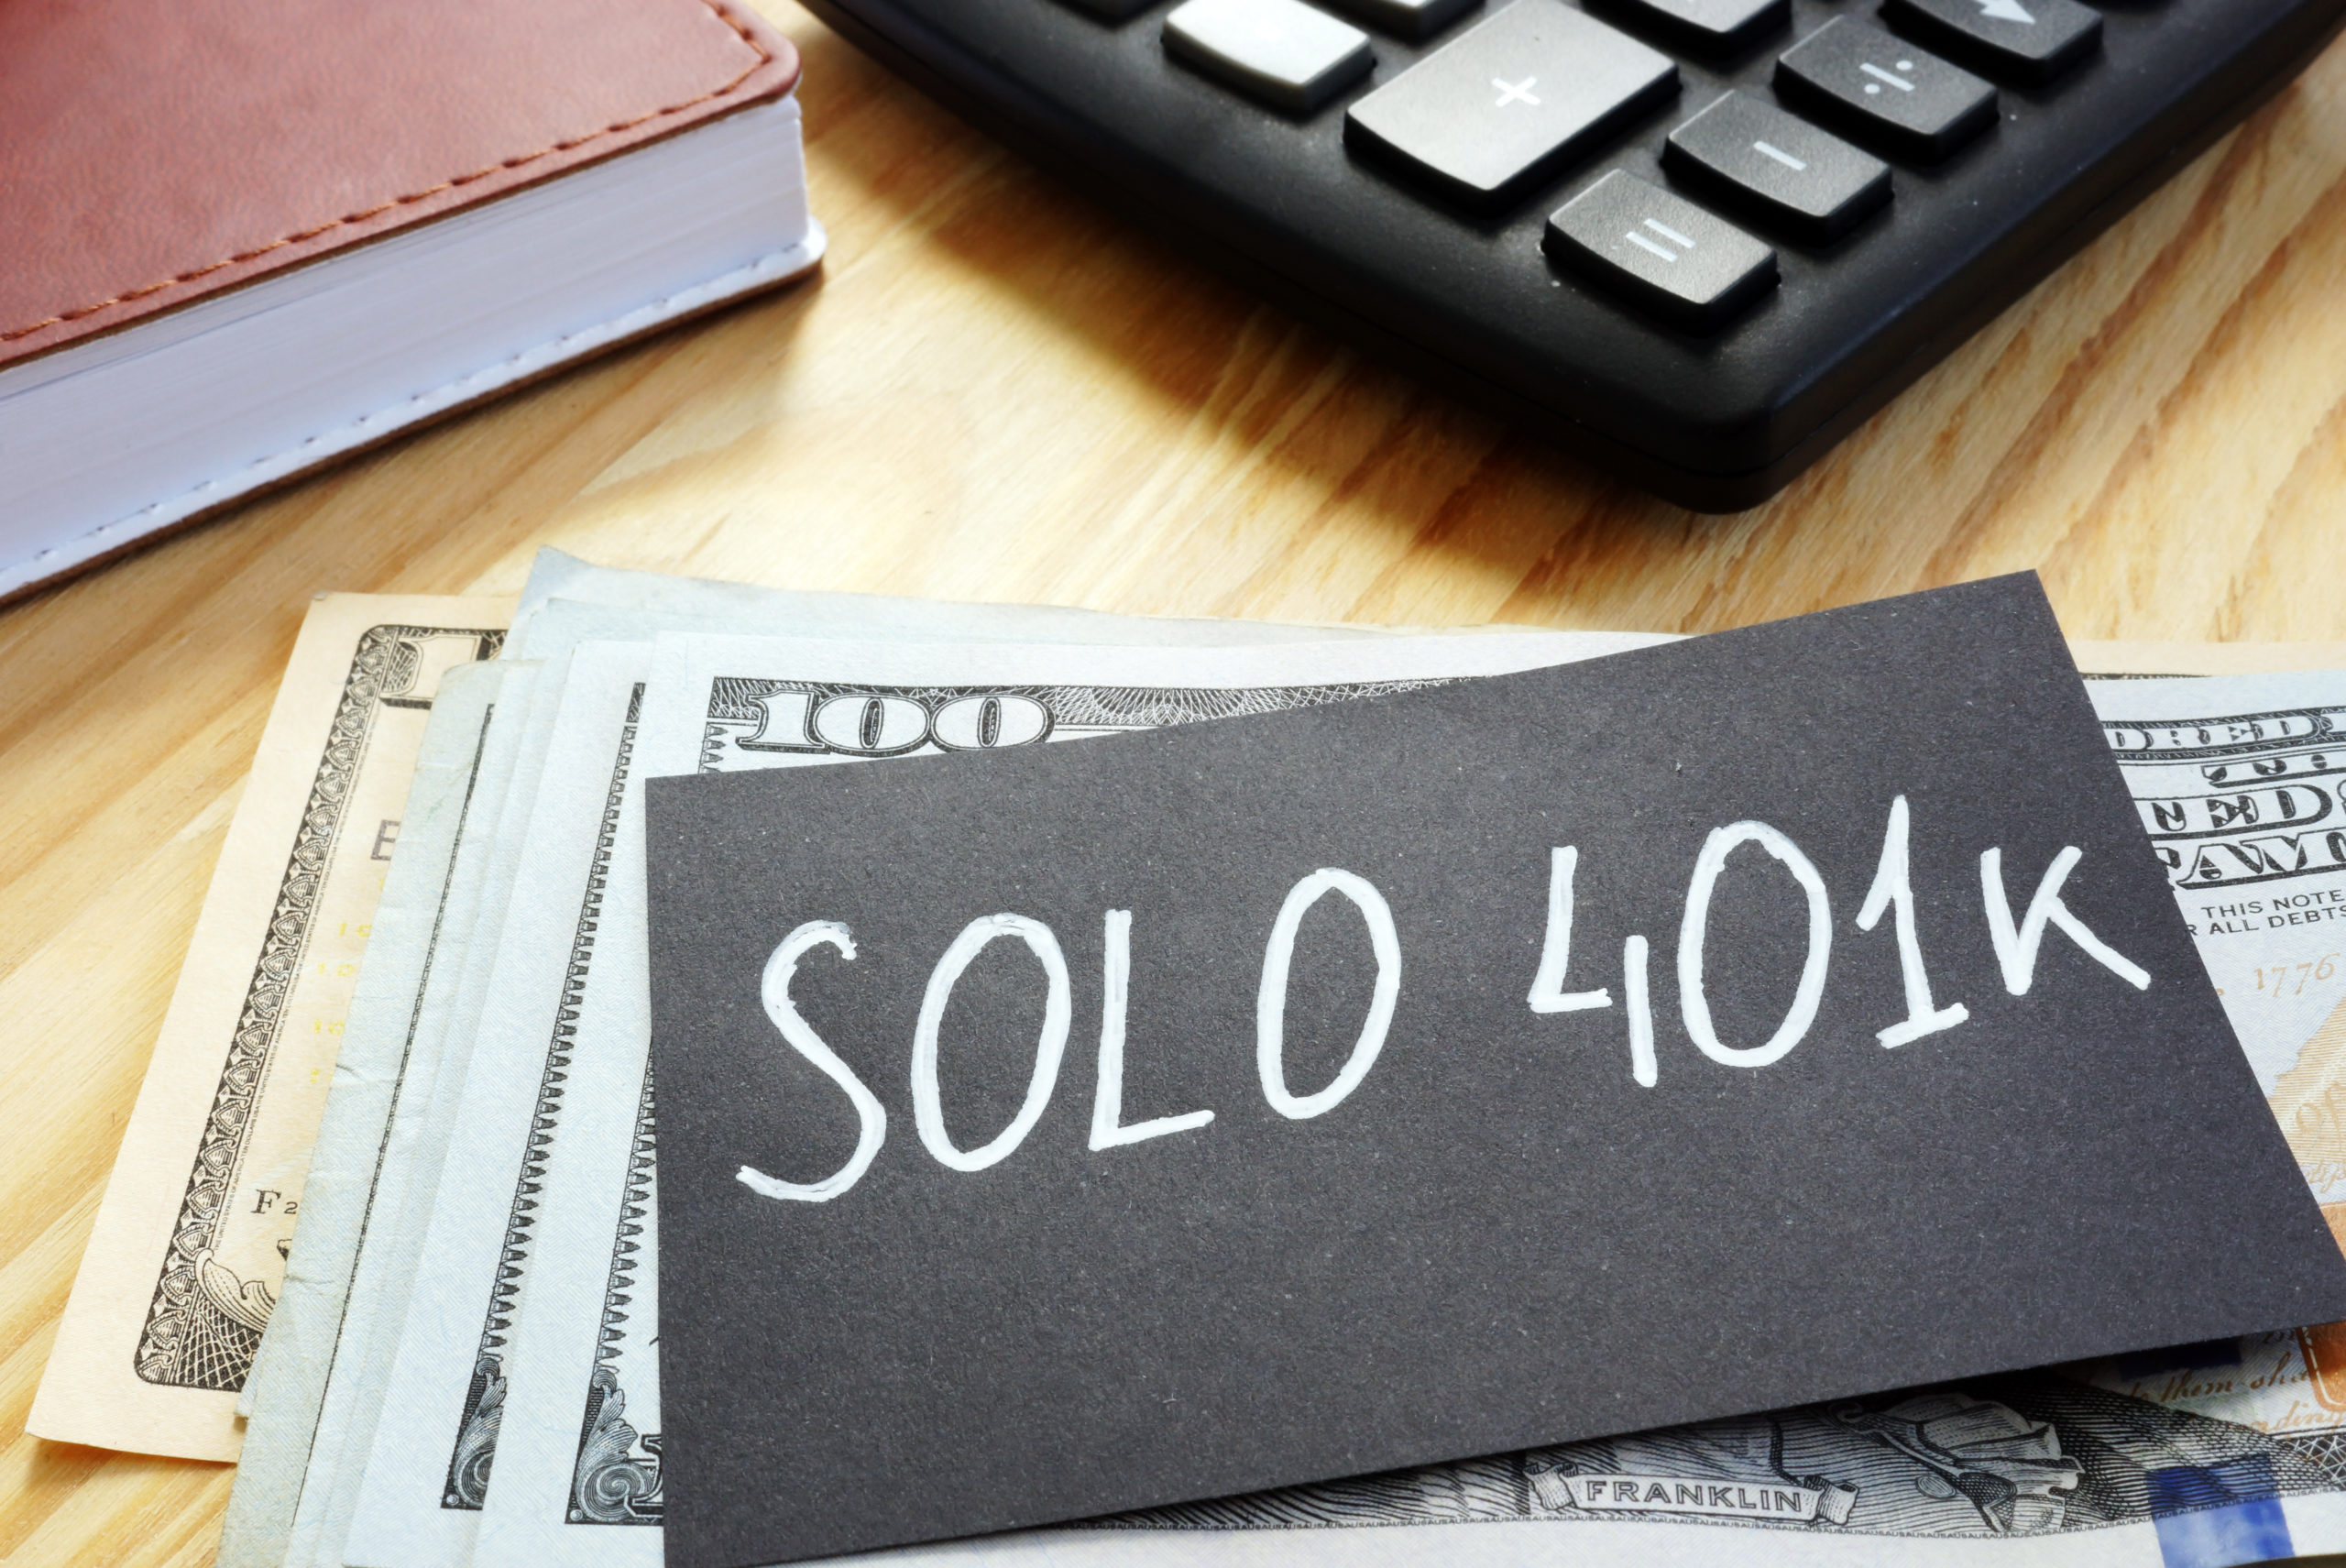 New Deadlines for Setting up the Solo 401k Solo 401k Rules